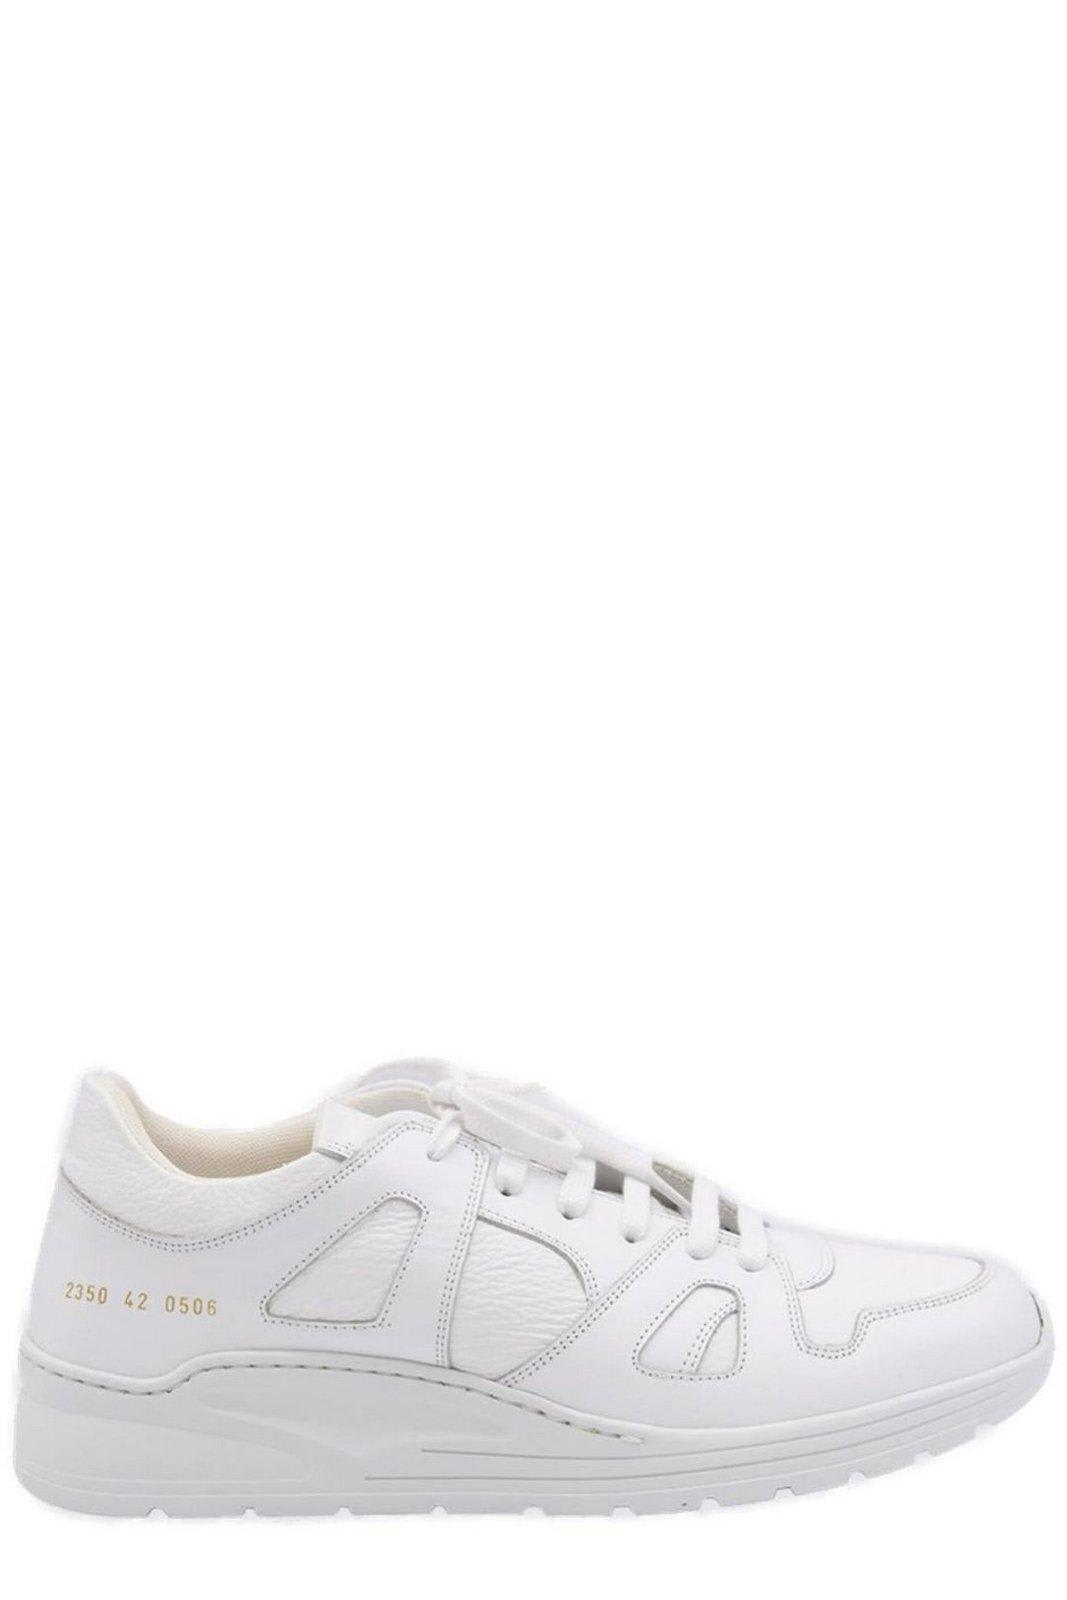 Common Projects Round Toe Lace-up Sneakers